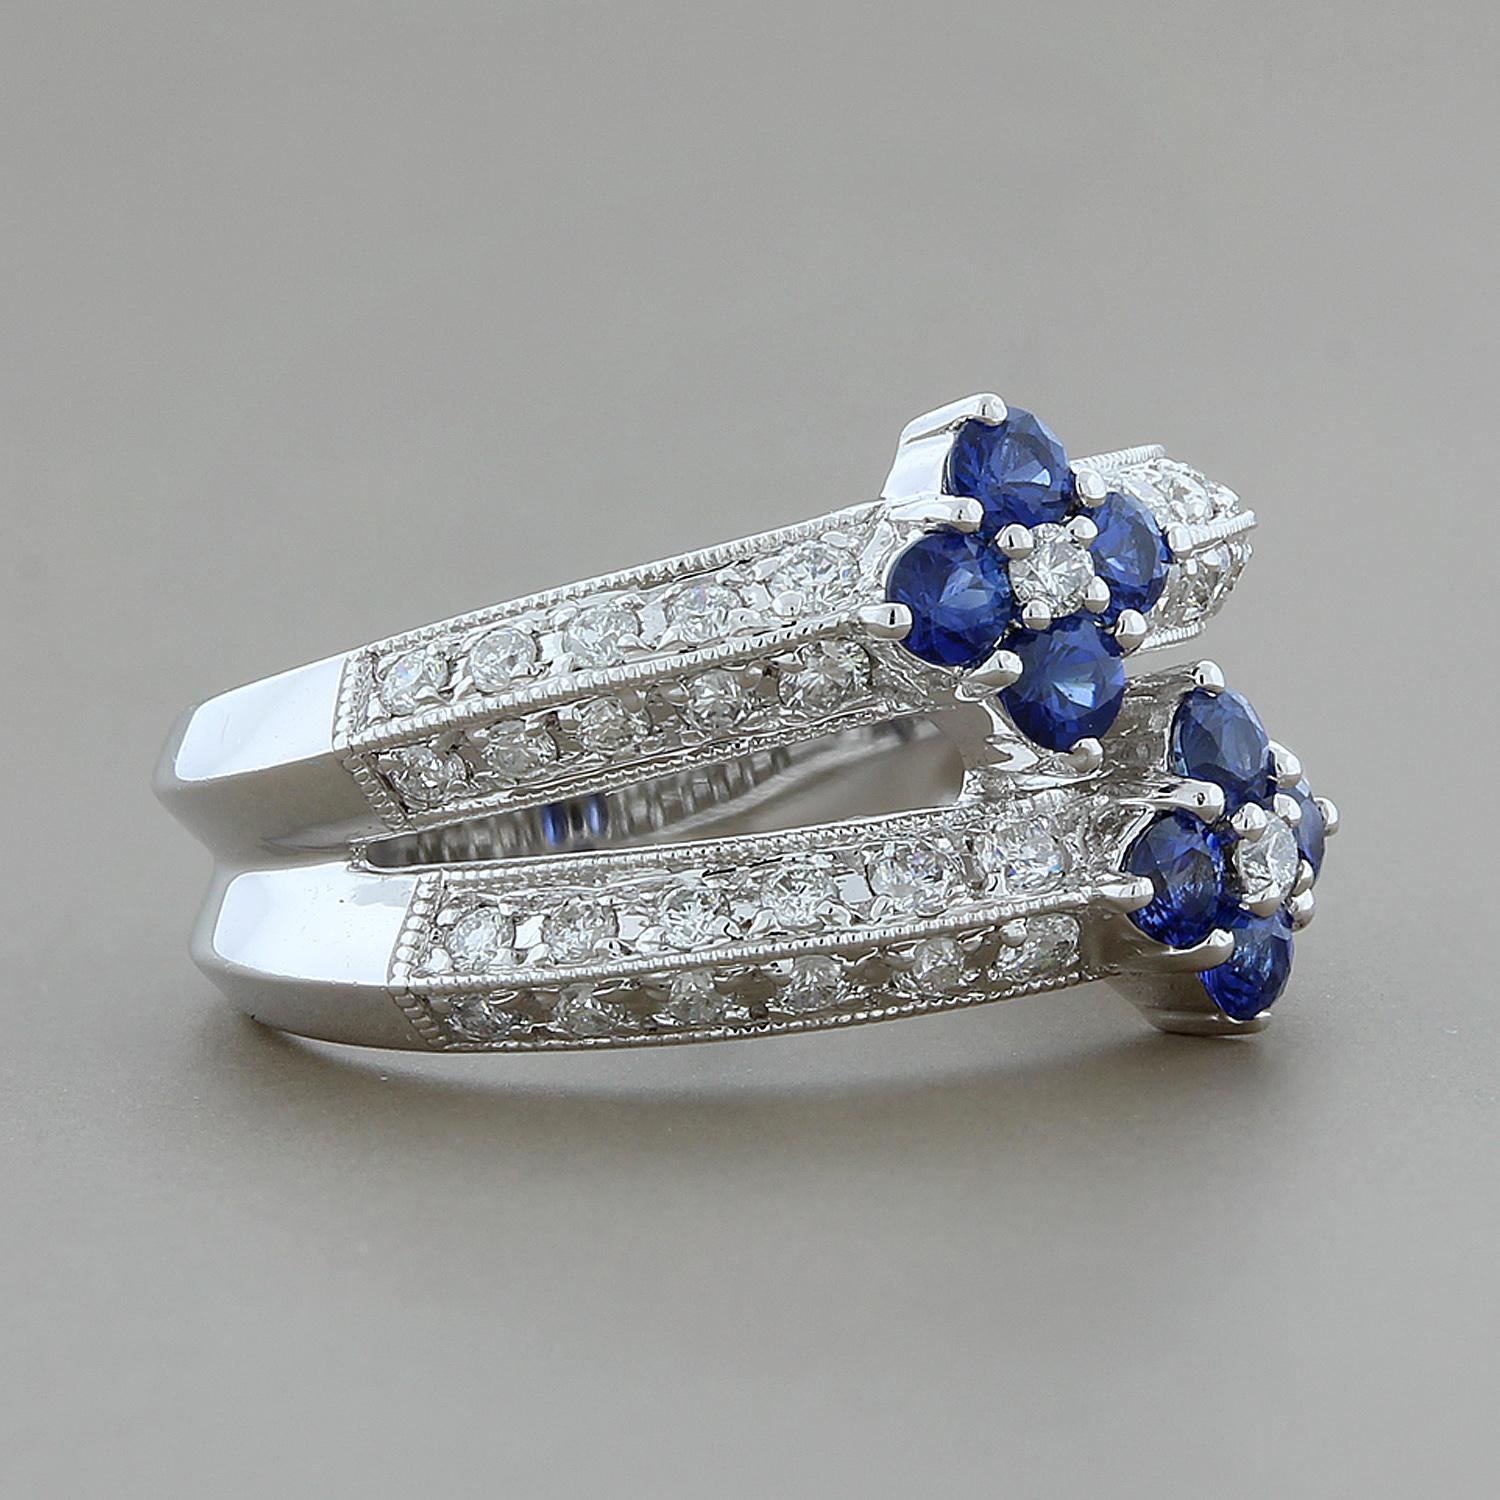 This ultra-feminine ring features 0.40 carats of ocean blue sapphires clustered together creating two florets.  It is accented by 0.70 carats of diamonds on a 14K white gold split shank.

Currently ring size 6.25